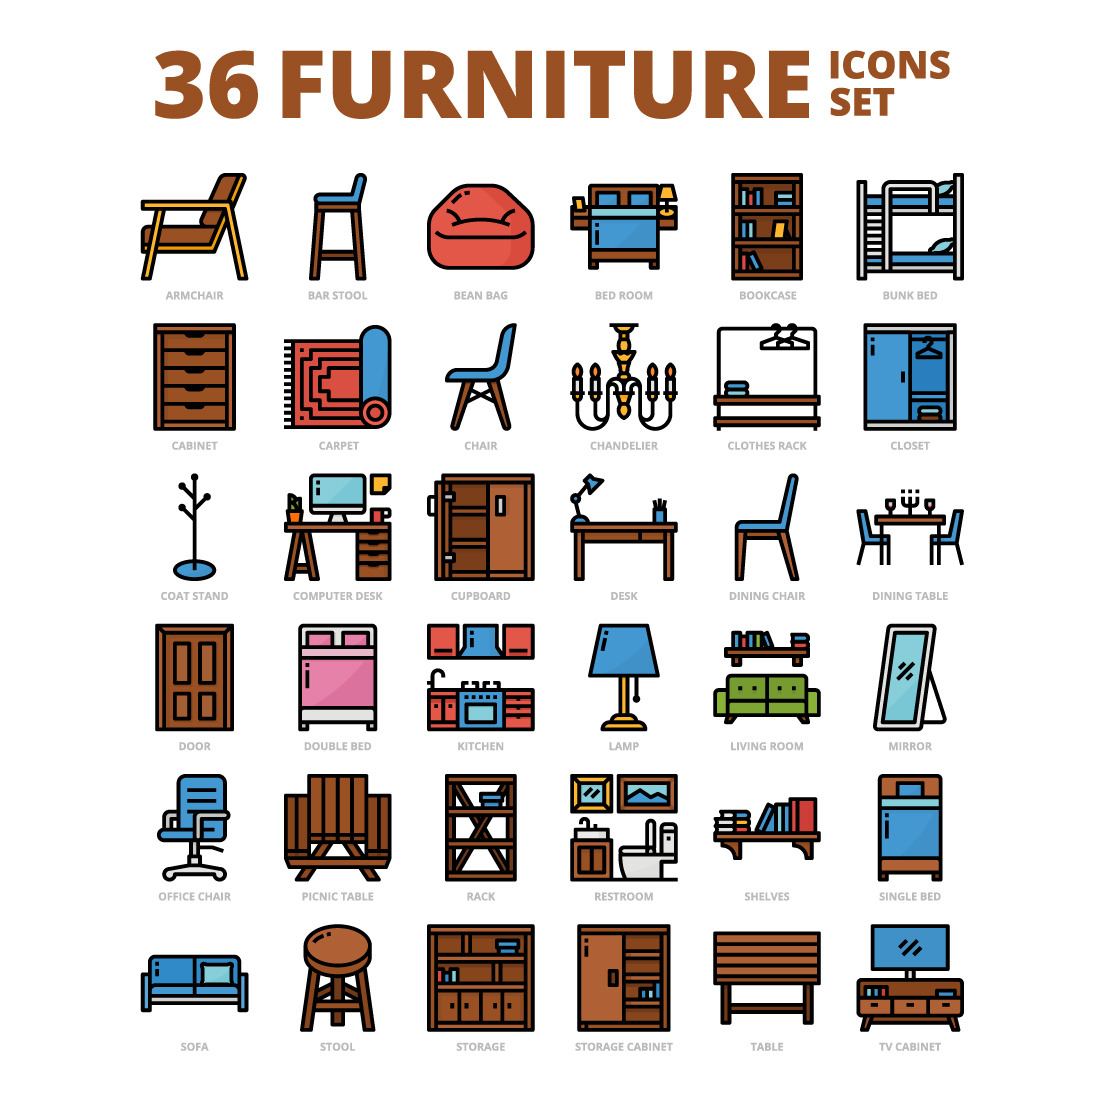 36 Furniture Icons Set x 4 Styles cover image.